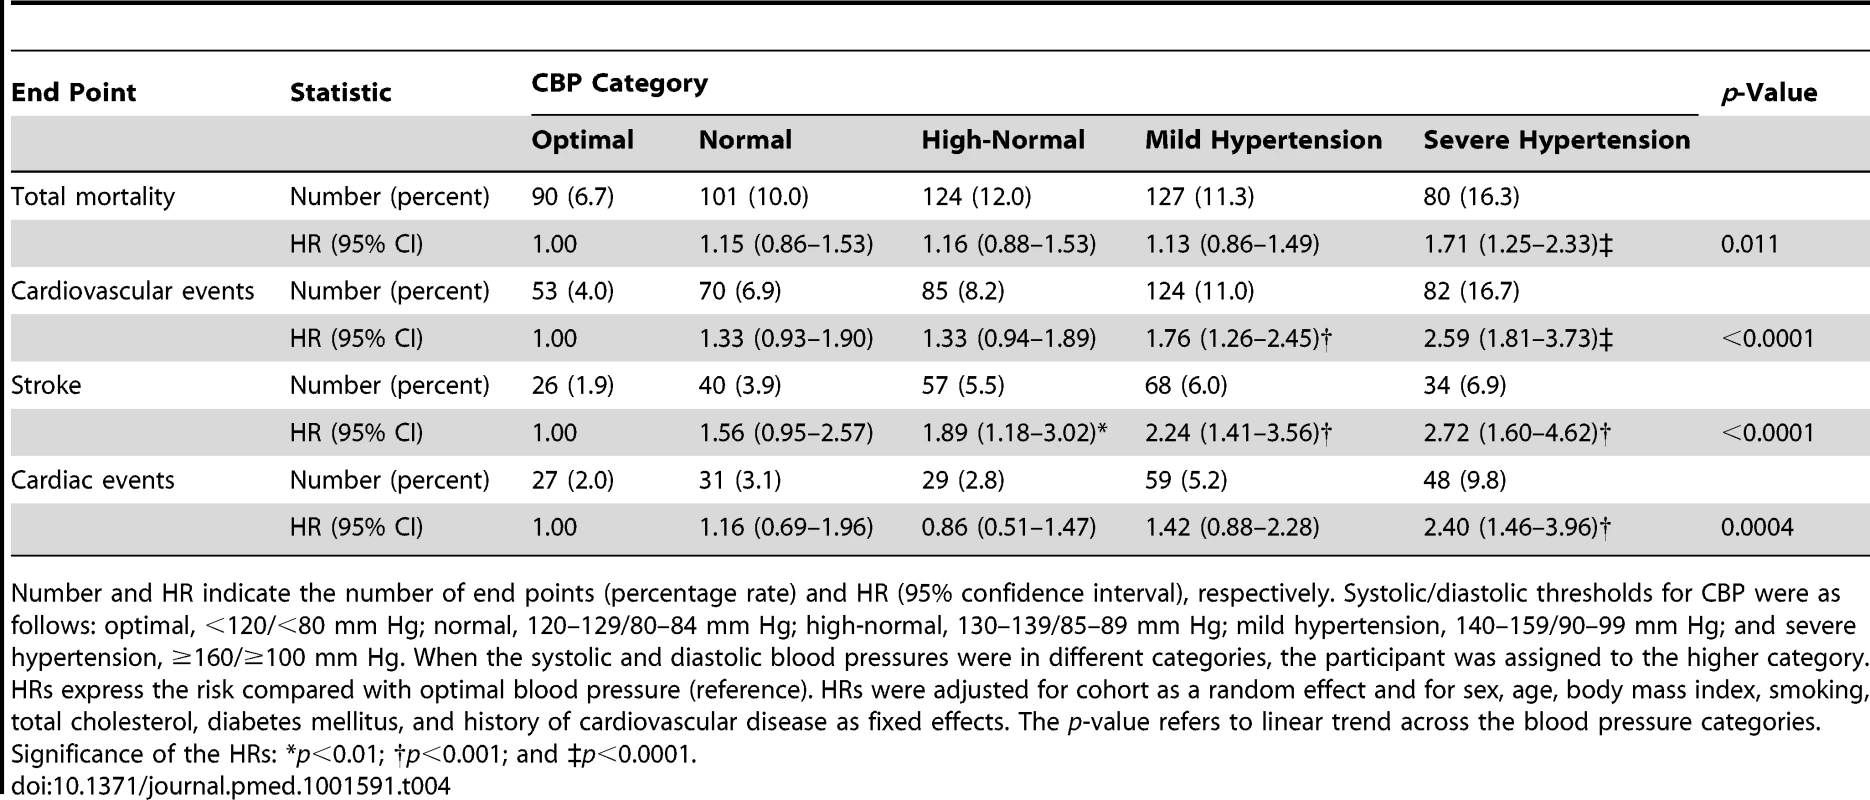 Risks associated with increasing categories of conventional blood pressure.